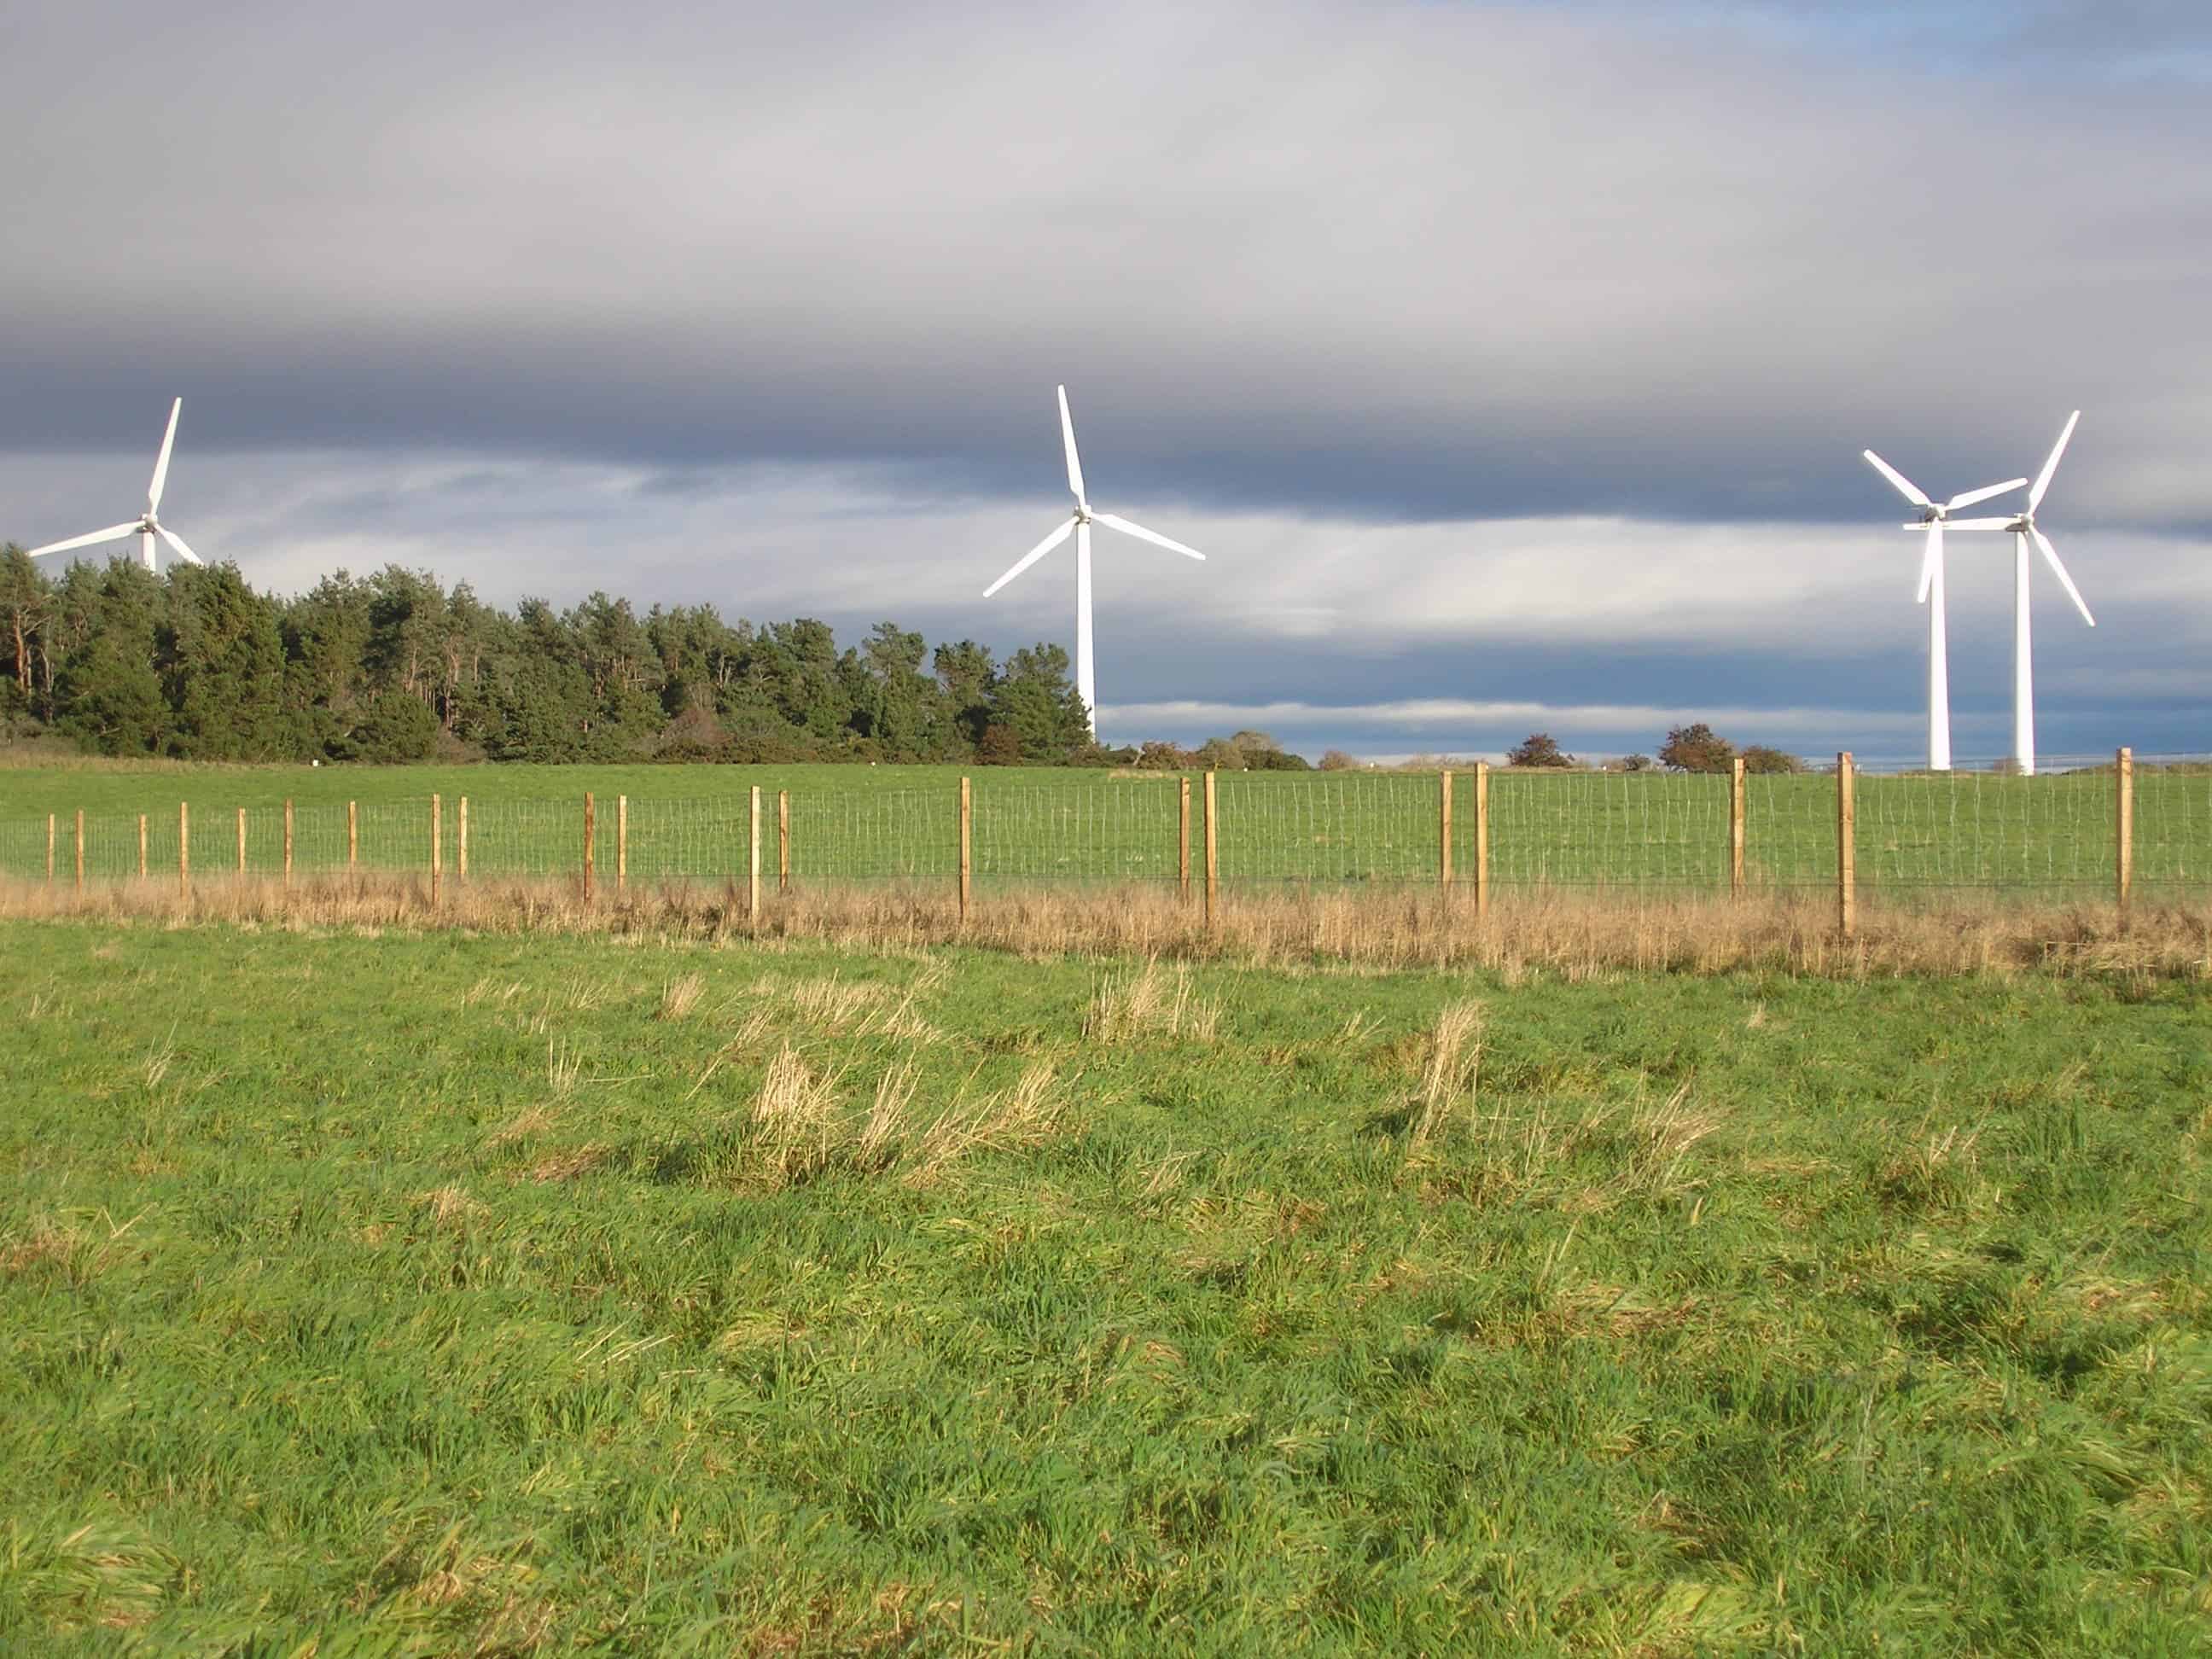 The wind turbines at Findhorn, part of an Ecovillage which is a net exporter of electricity. W. L. Tarbert